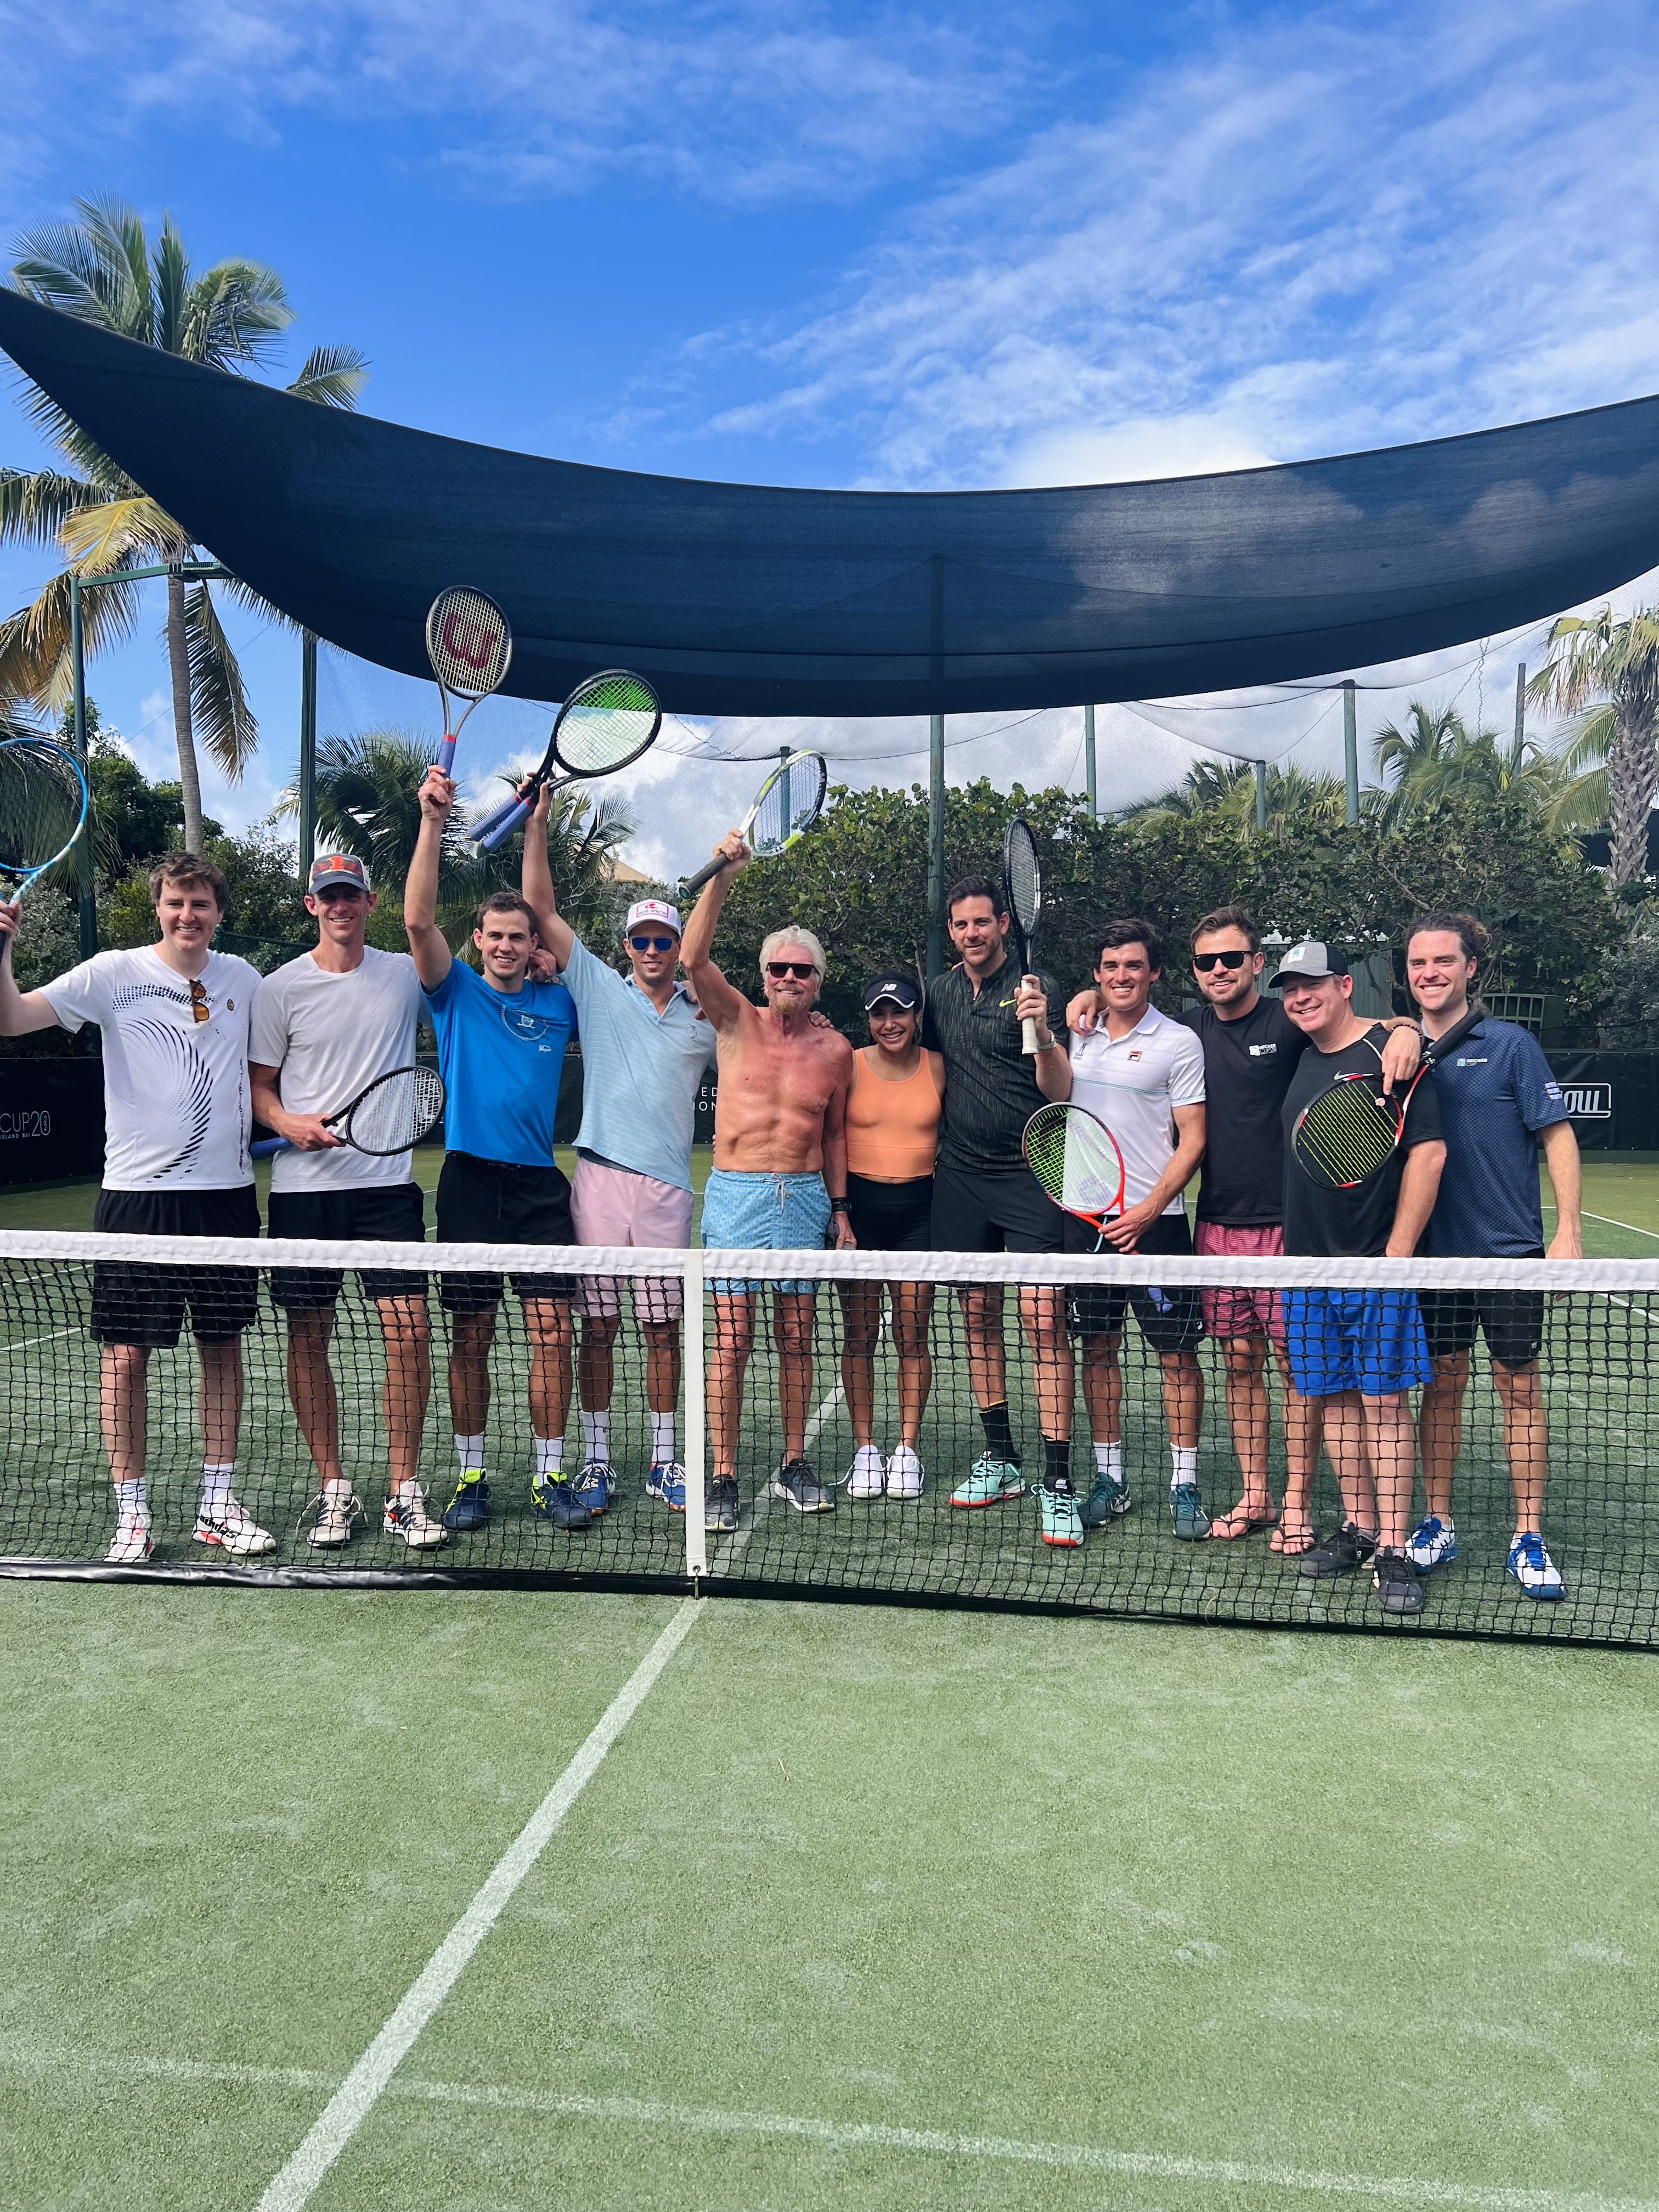 Richard Branson and the team at the 2022Necker Cup tennis tournament